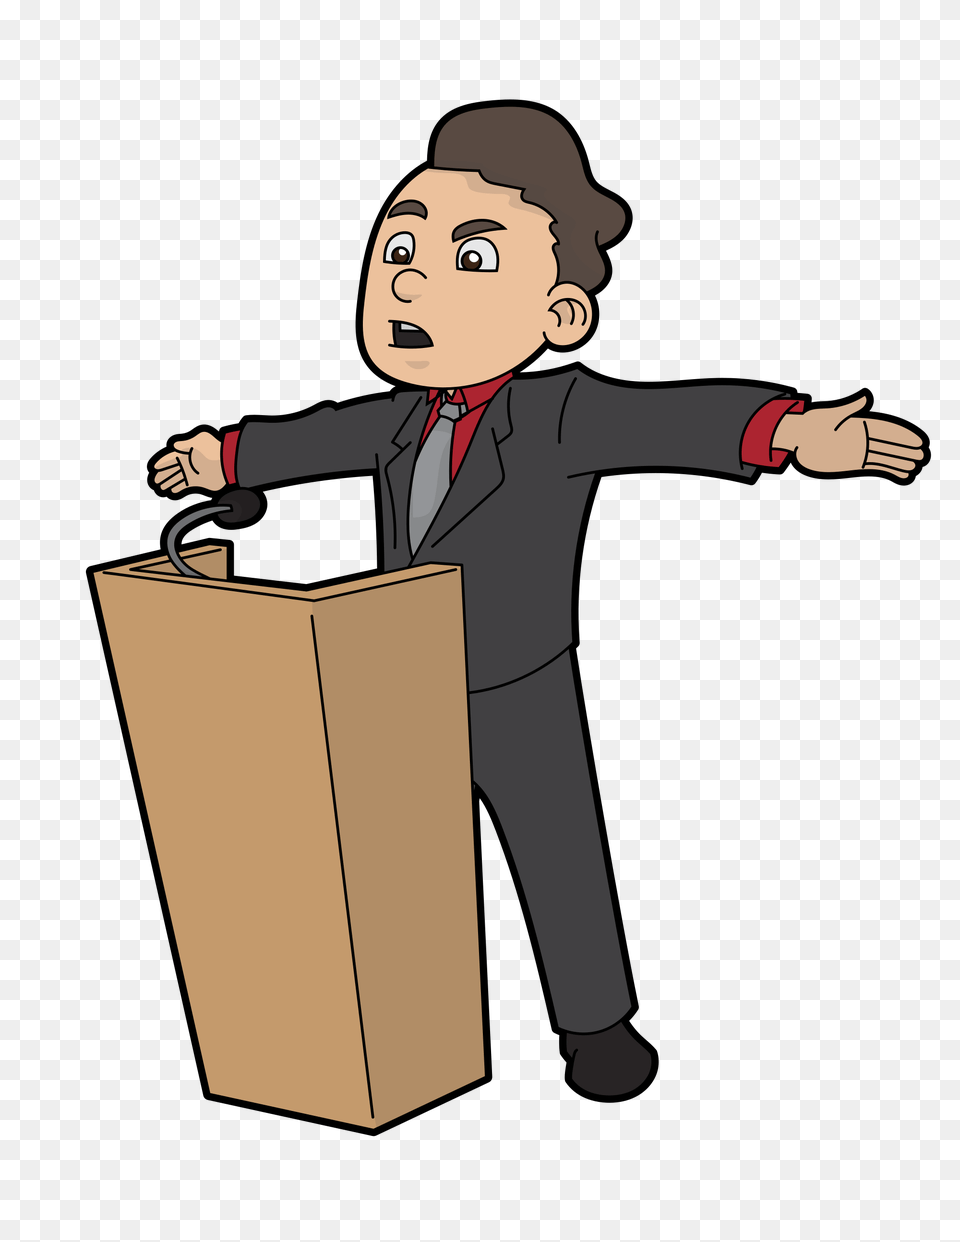 Public Speaking Clipart Free Transparent Images With Cliparts, Crowd, Person, Audience, Speech Png Image